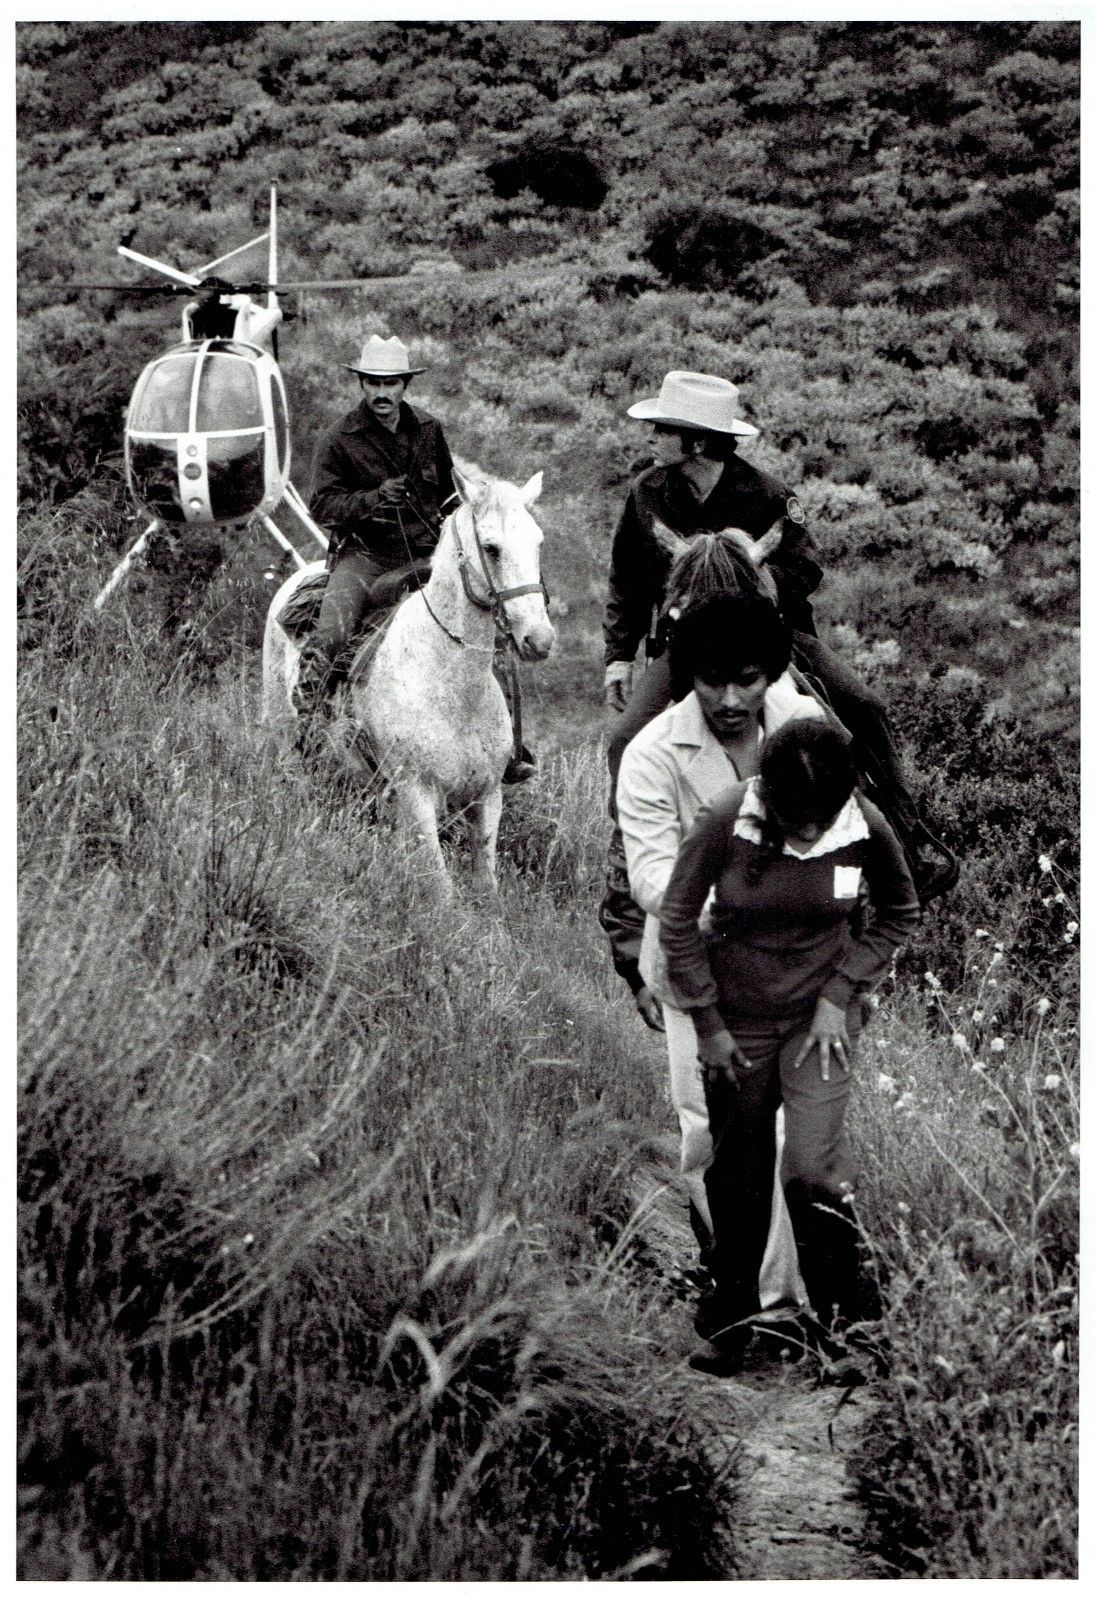 This 1970s/80s photo captures a poignant moment at the US border, where a couple seeking a new life are halted by horse-mounted agents, with a helicopter in the backdrop symbolizing the clash between tradition and modern immigration enforcement.